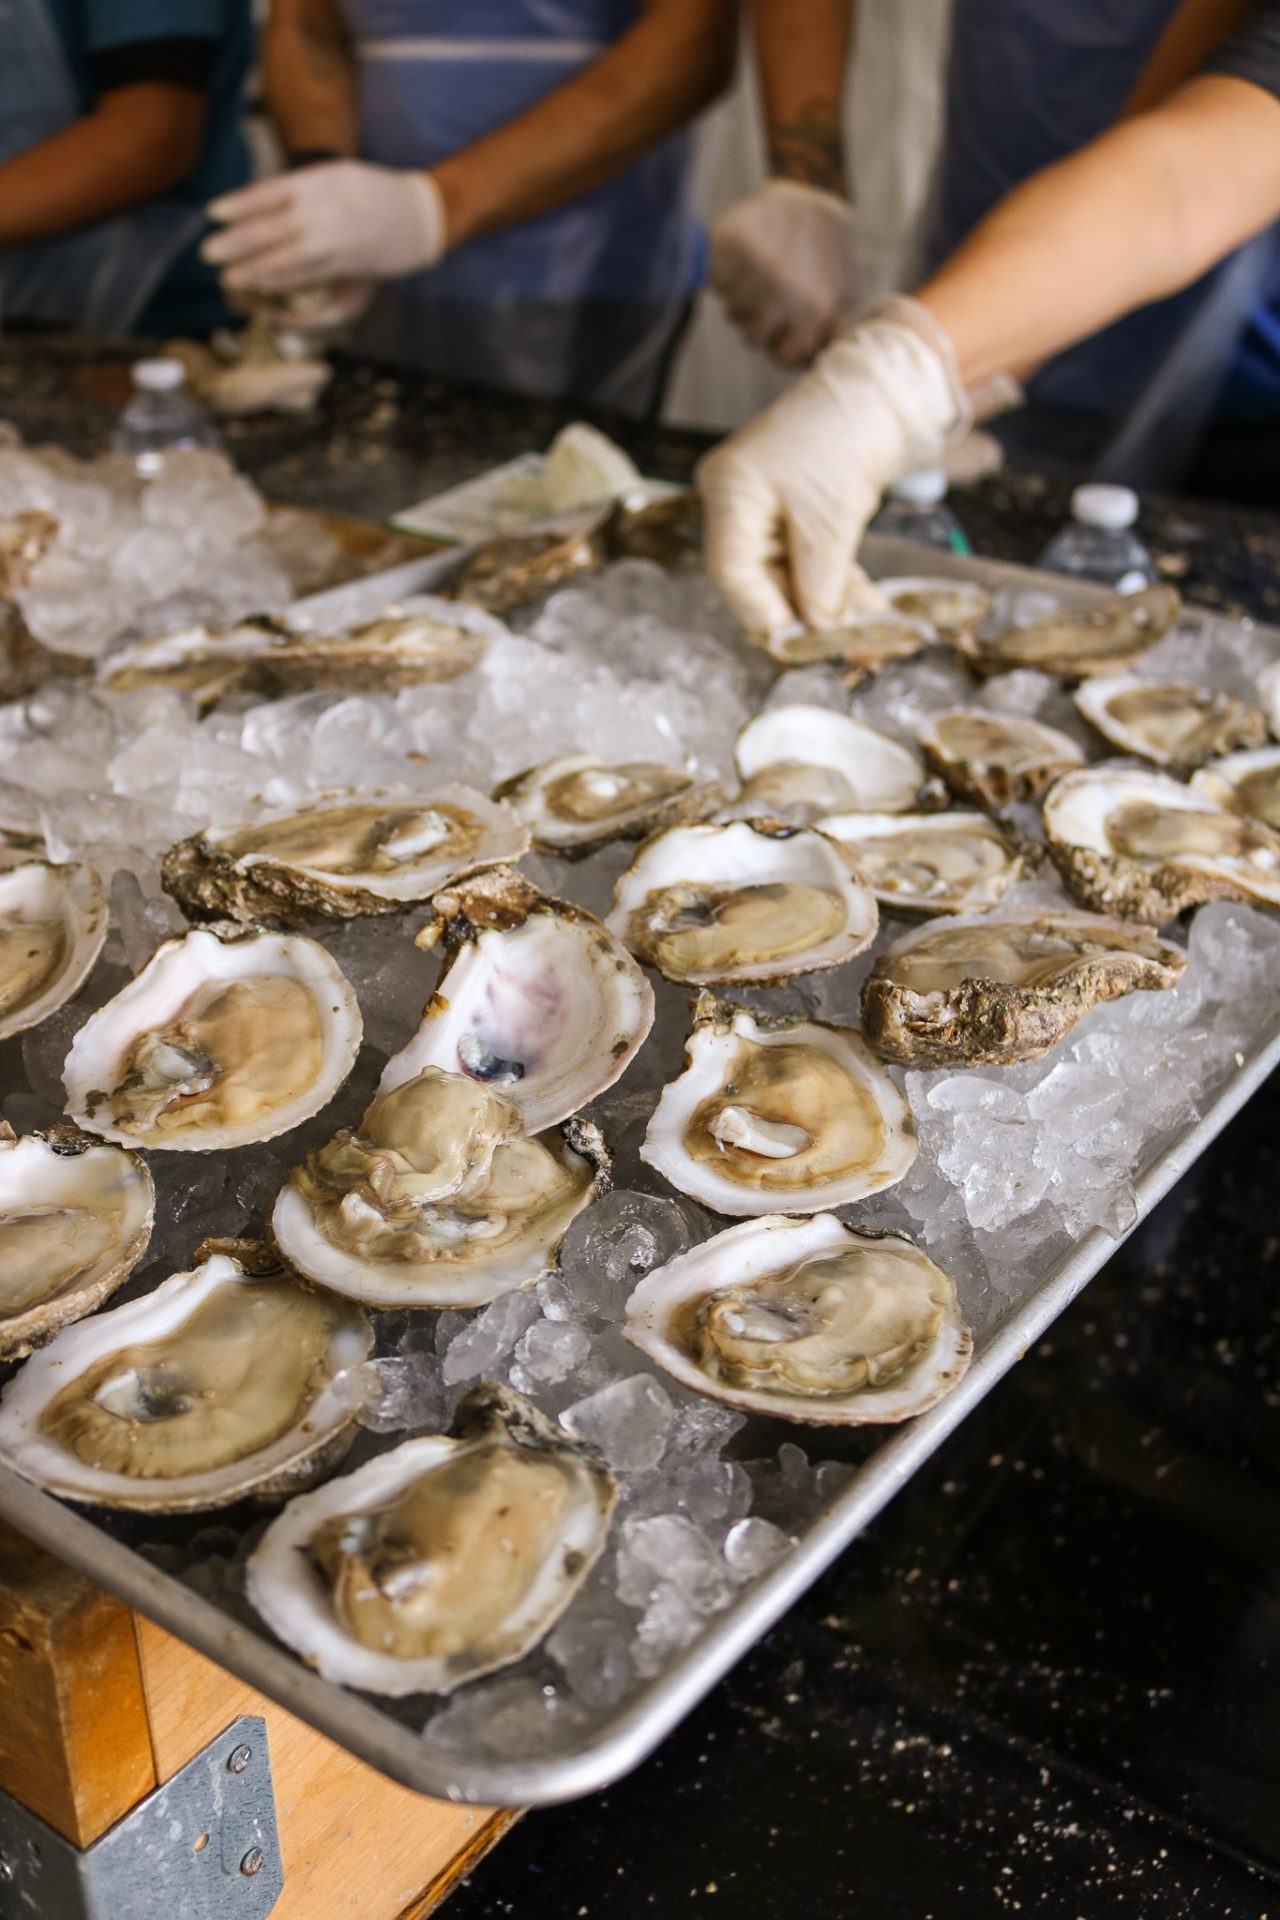 All About The Austin Oyster Festival So Much Life